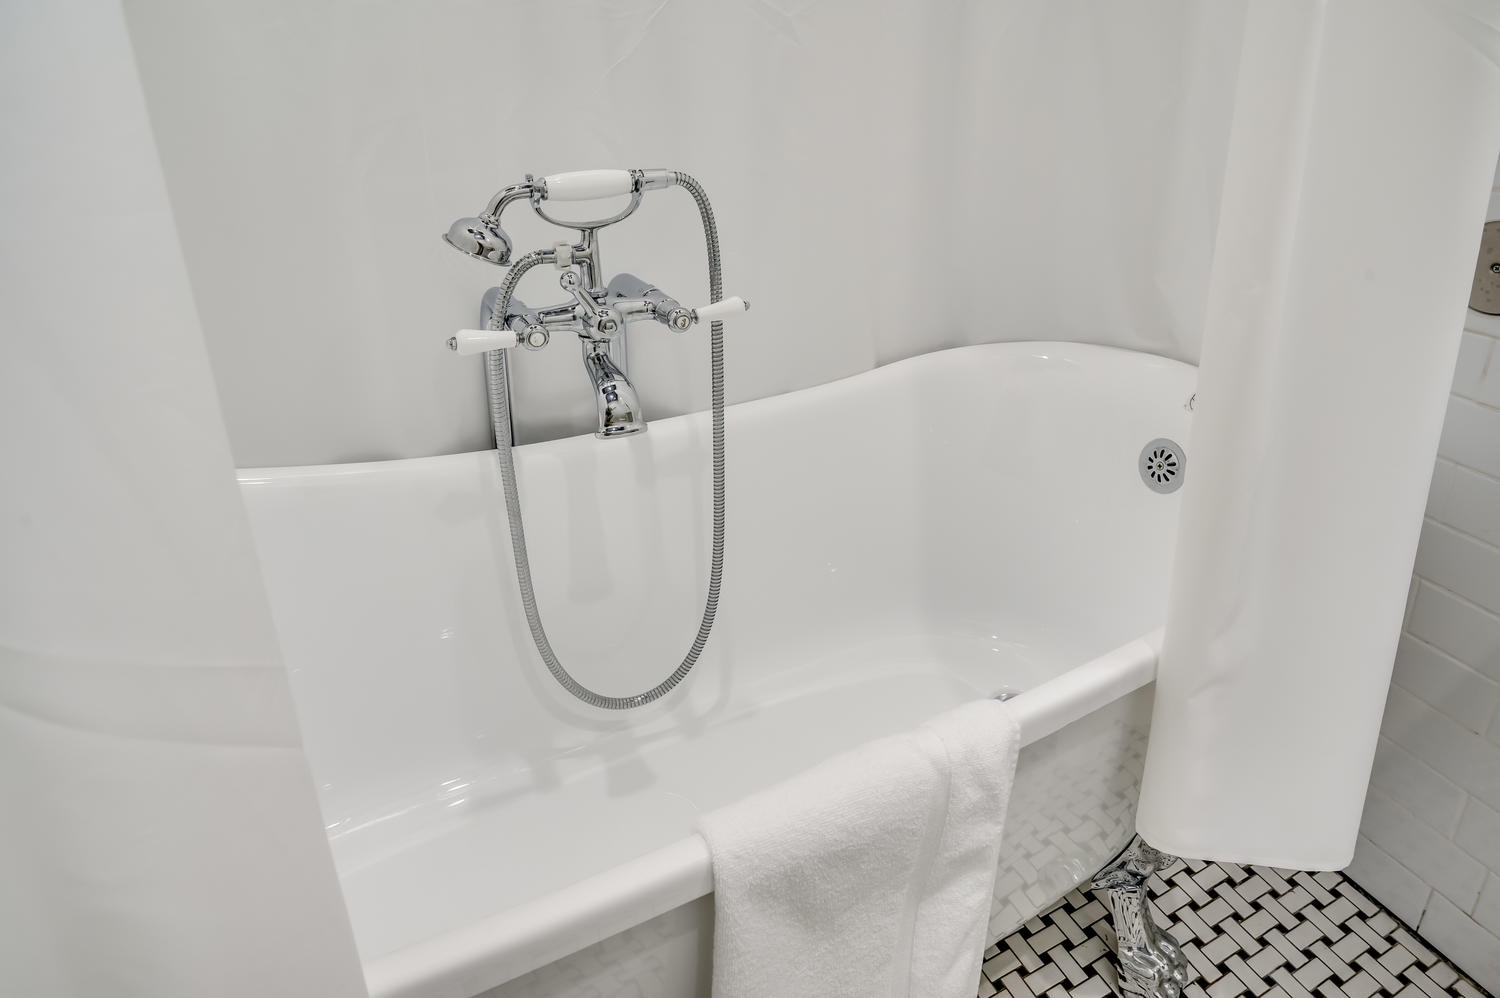 Suite 101 – Sink into the En Suite’s Claw-Foot Tub after a day of exploring the best of Austin